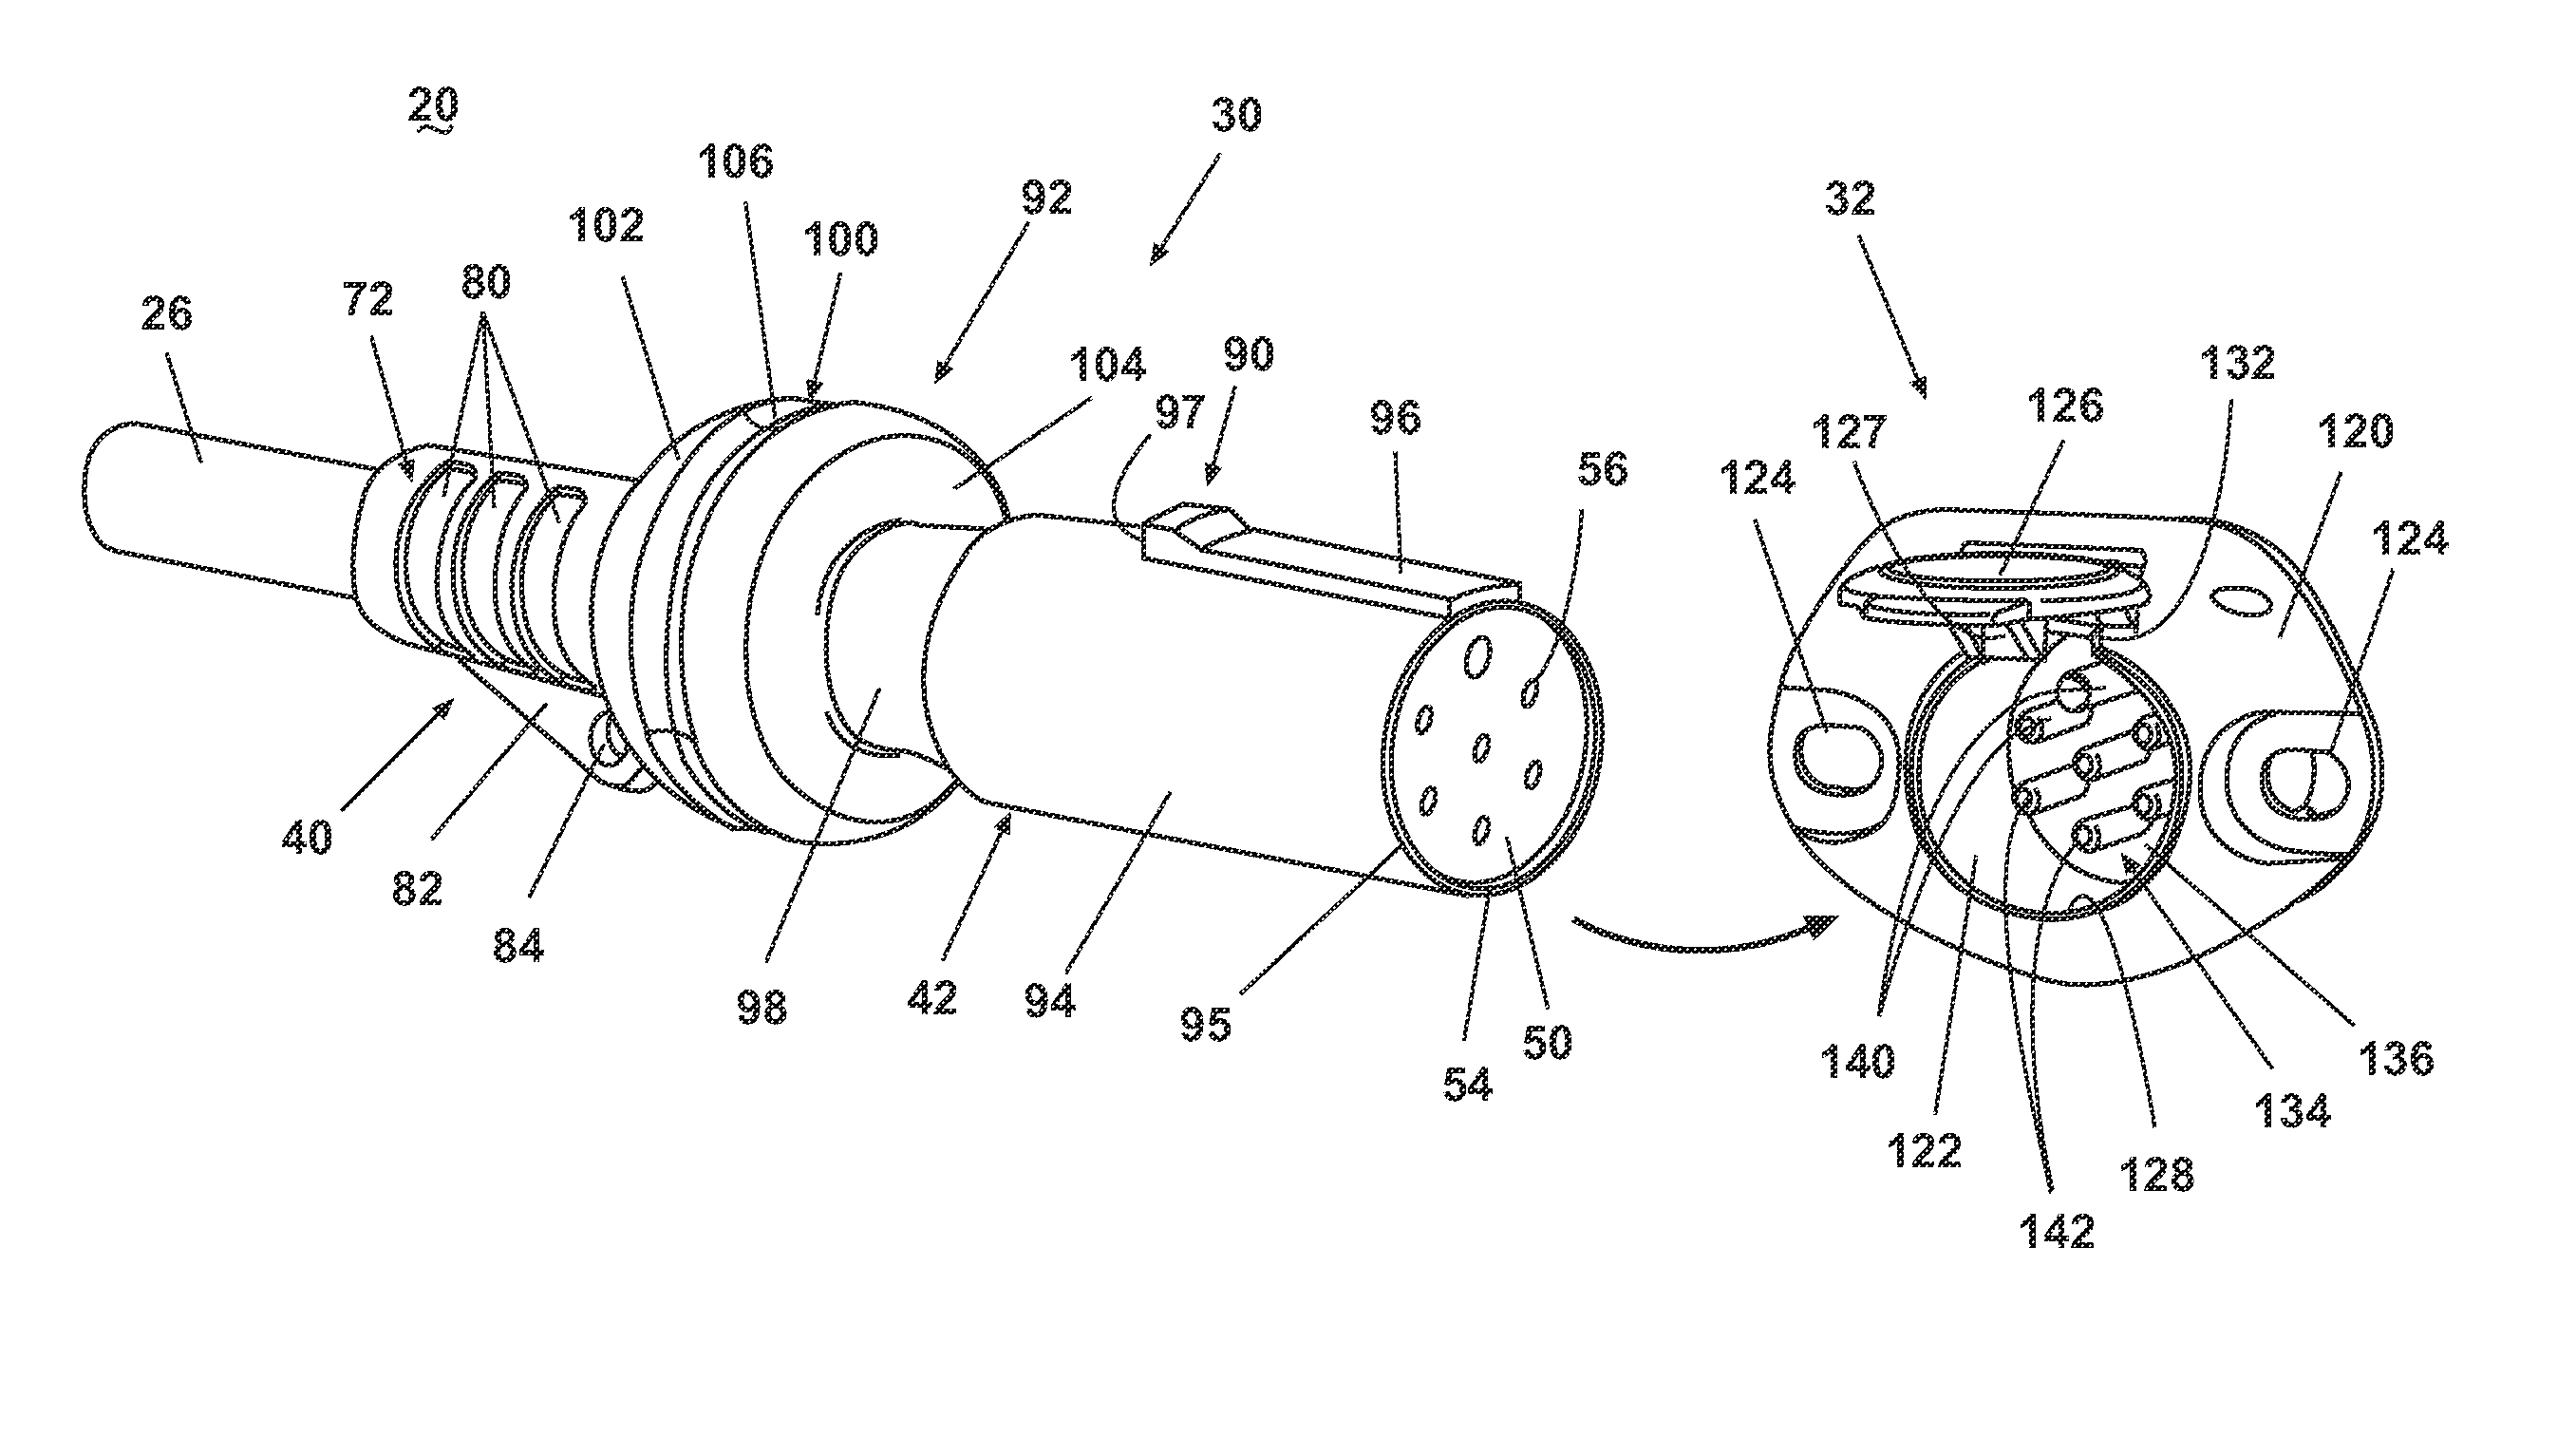 Electrical connector assembly